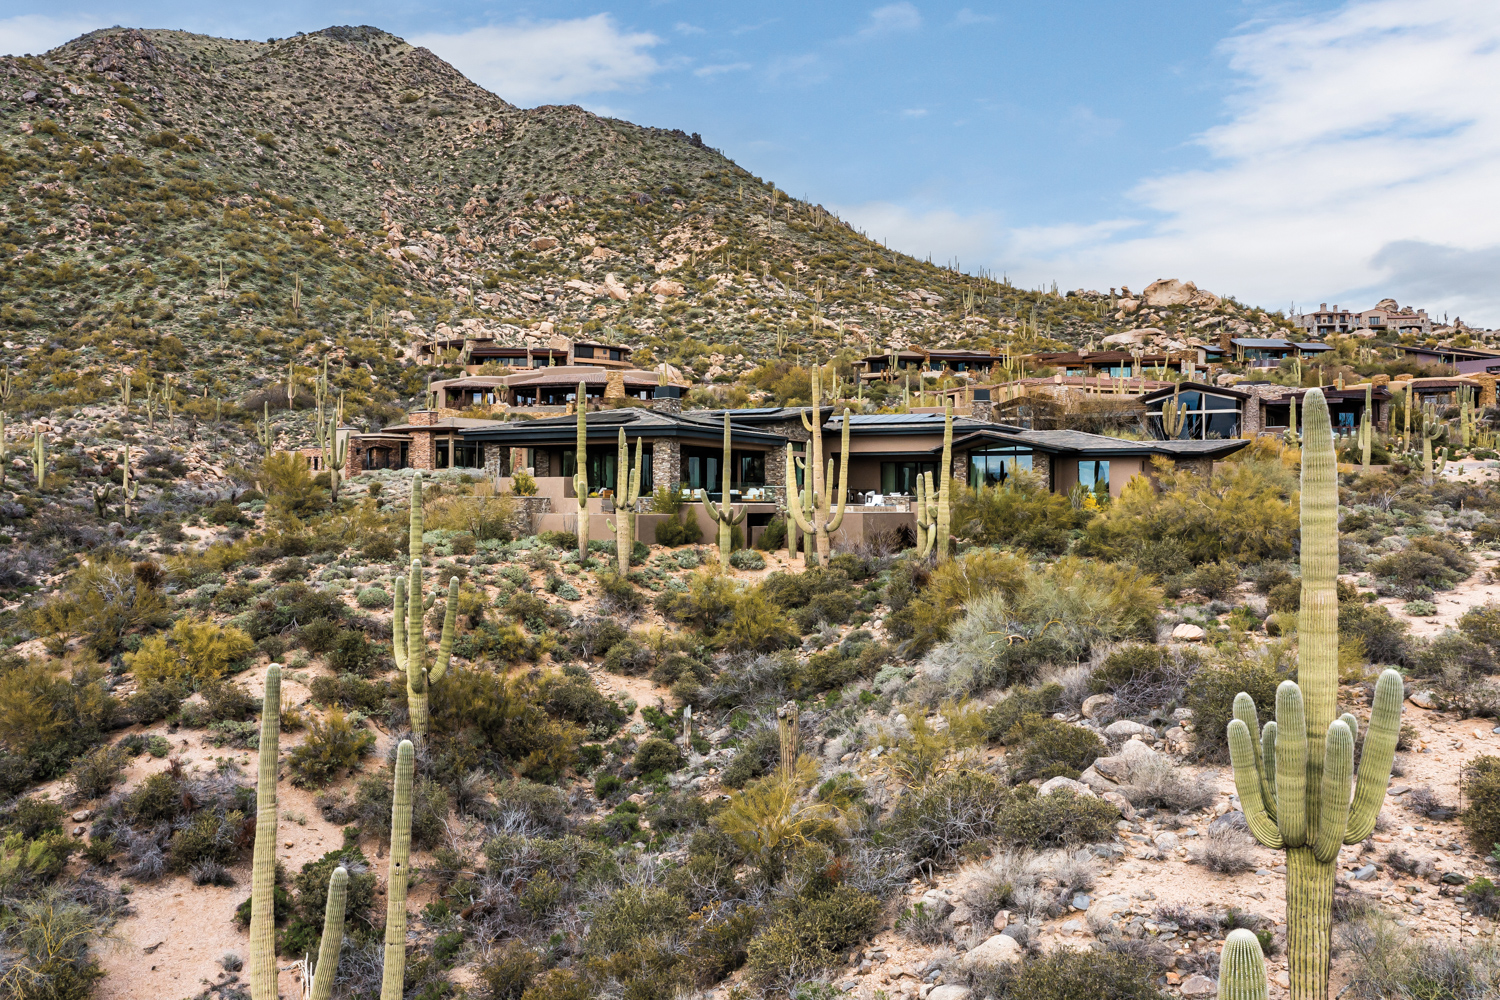 Take A Look At The Saguaros Along The Edge Of This Arizona Abode